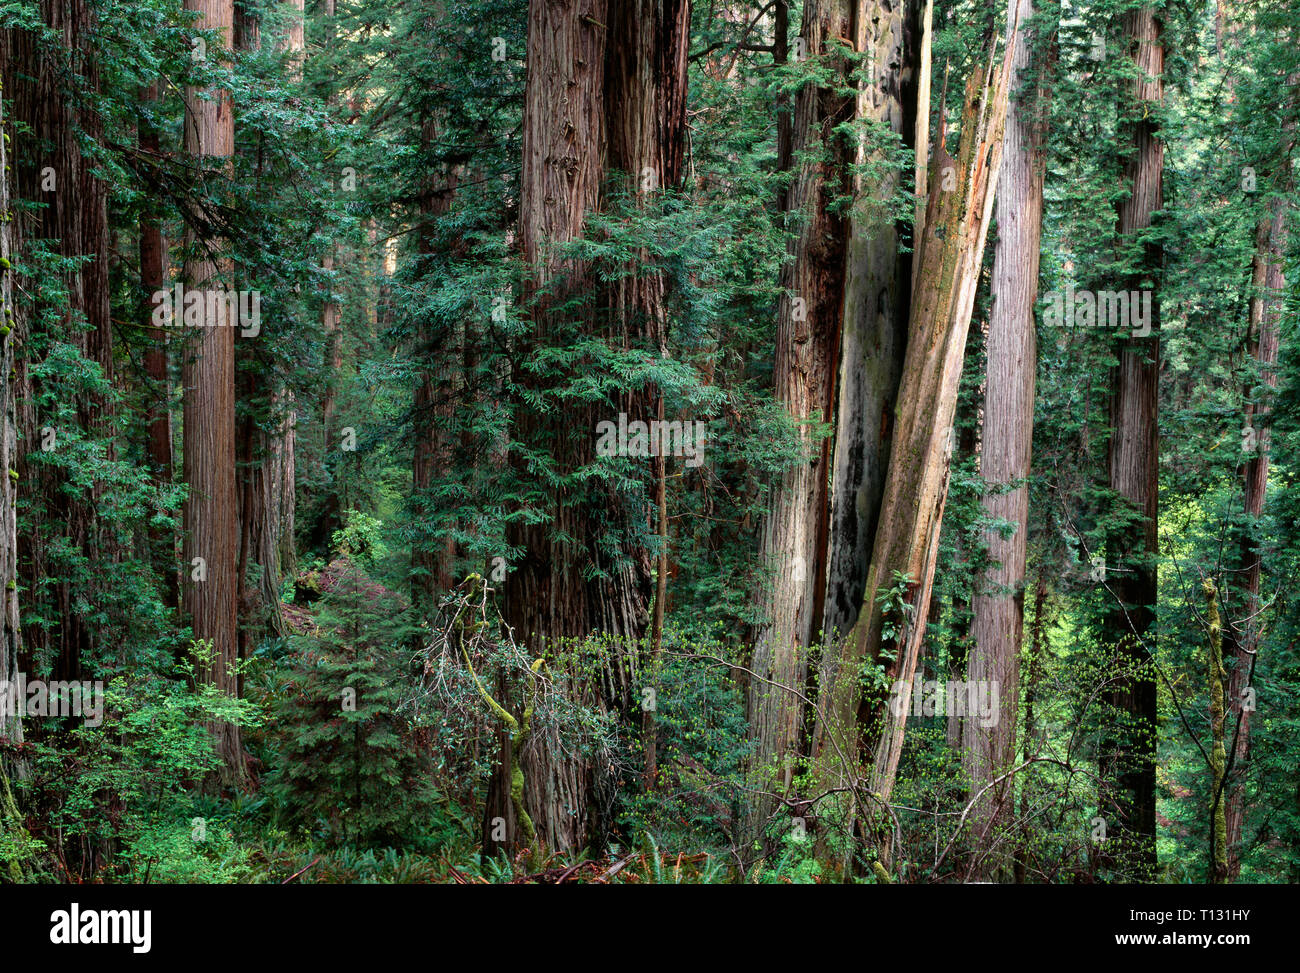 USA, California, Prairie Creek Redwoods State Park, Redwood trees tower above ferns and seedlings in understory. Stock Photo